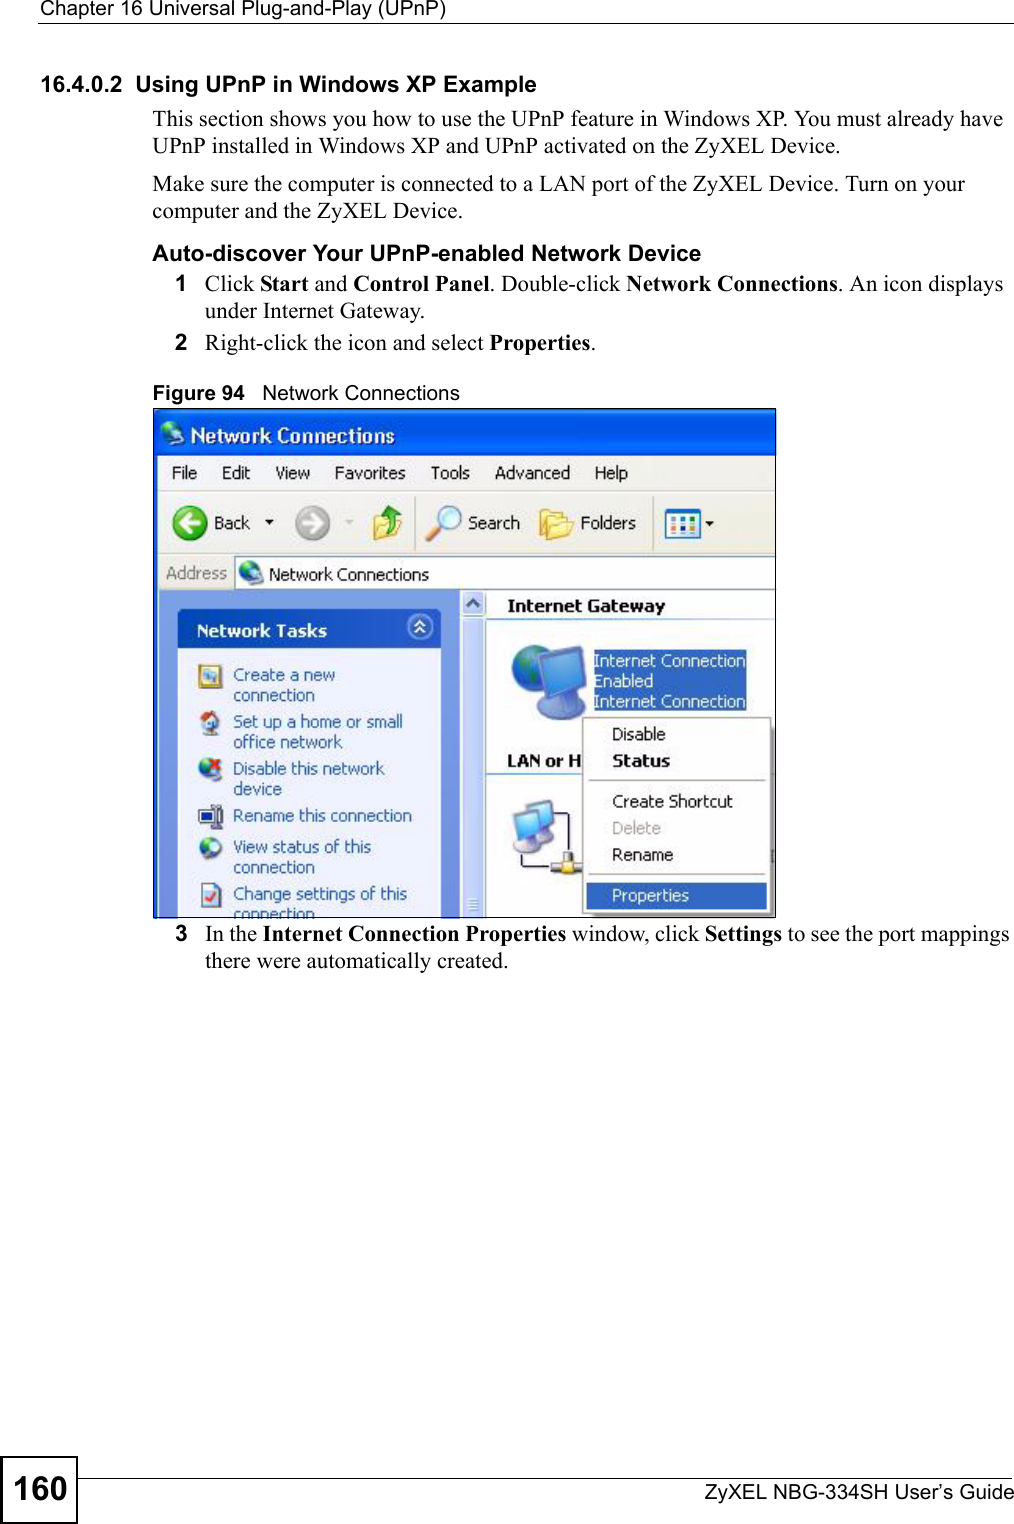 Chapter 16 Universal Plug-and-Play (UPnP)ZyXEL NBG-334SH User’s Guide16016.4.0.2  Using UPnP in Windows XP ExampleThis section shows you how to use the UPnP feature in Windows XP. You must already have UPnP installed in Windows XP and UPnP activated on the ZyXEL Device.Make sure the computer is connected to a LAN port of the ZyXEL Device. Turn on your computer and the ZyXEL Device. Auto-discover Your UPnP-enabled Network Device1Click Start and Control Panel. Double-click Network Connections. An icon displays under Internet Gateway.2Right-click the icon and select Properties. Figure 94   Network Connections3In the Internet Connection Properties window, click Settings to see the port mappings there were automatically created. 